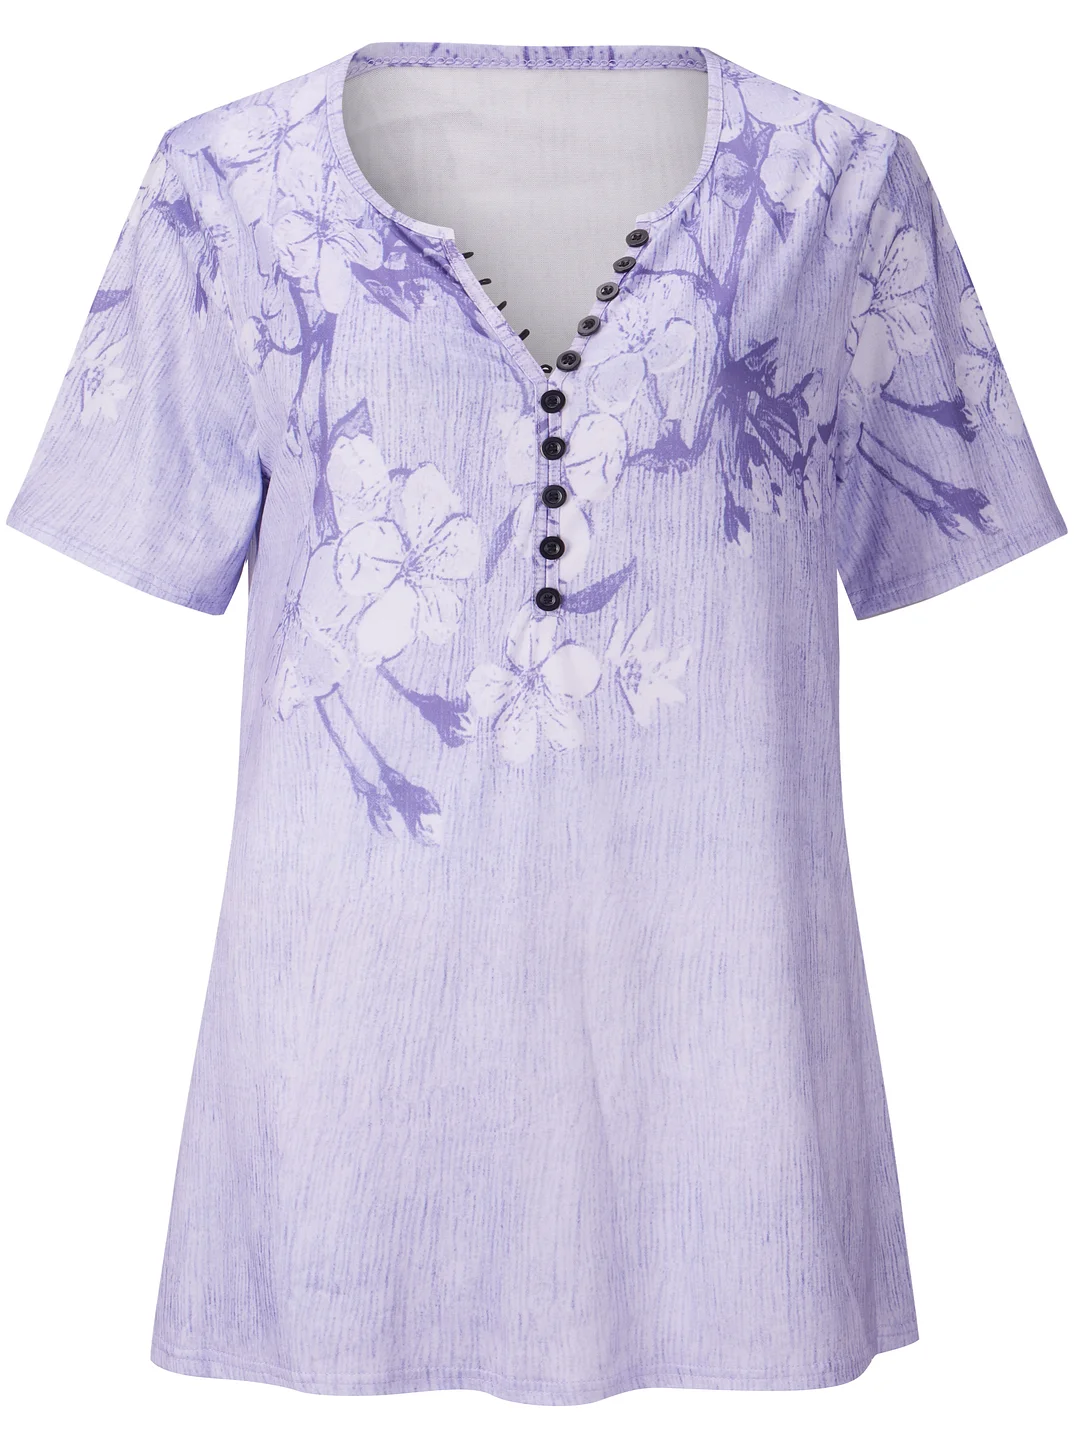 Style & Comfort for Mature Women Women's Short Sleeve V-neck Floral Printed Top